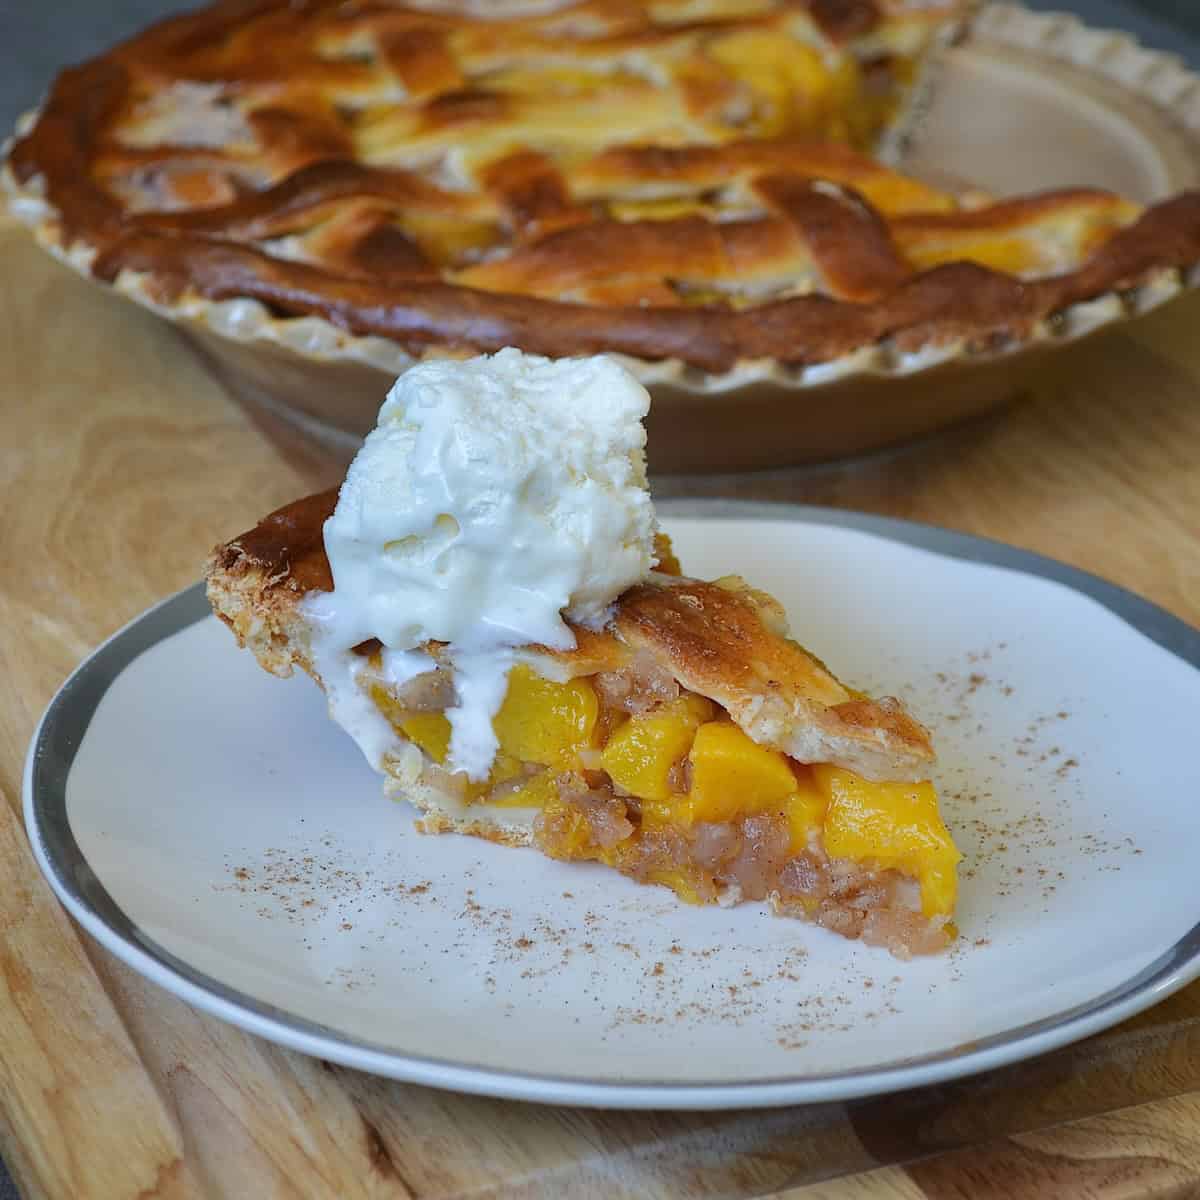 Slice of peach pie with lattice topping